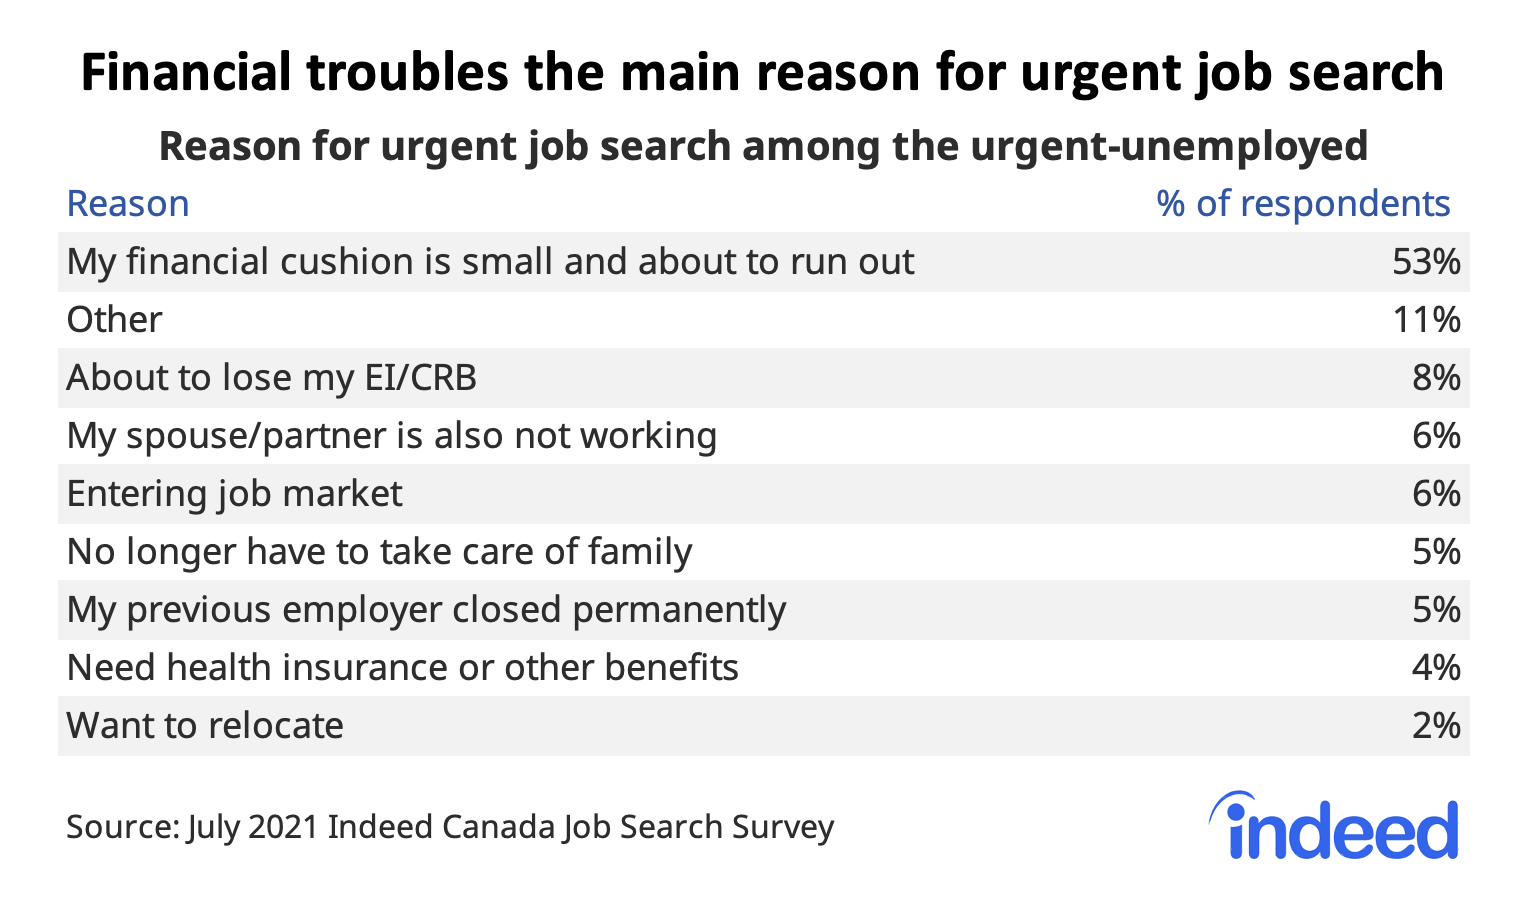 Table titled “Financial troubles the main reason for urgent job search.”